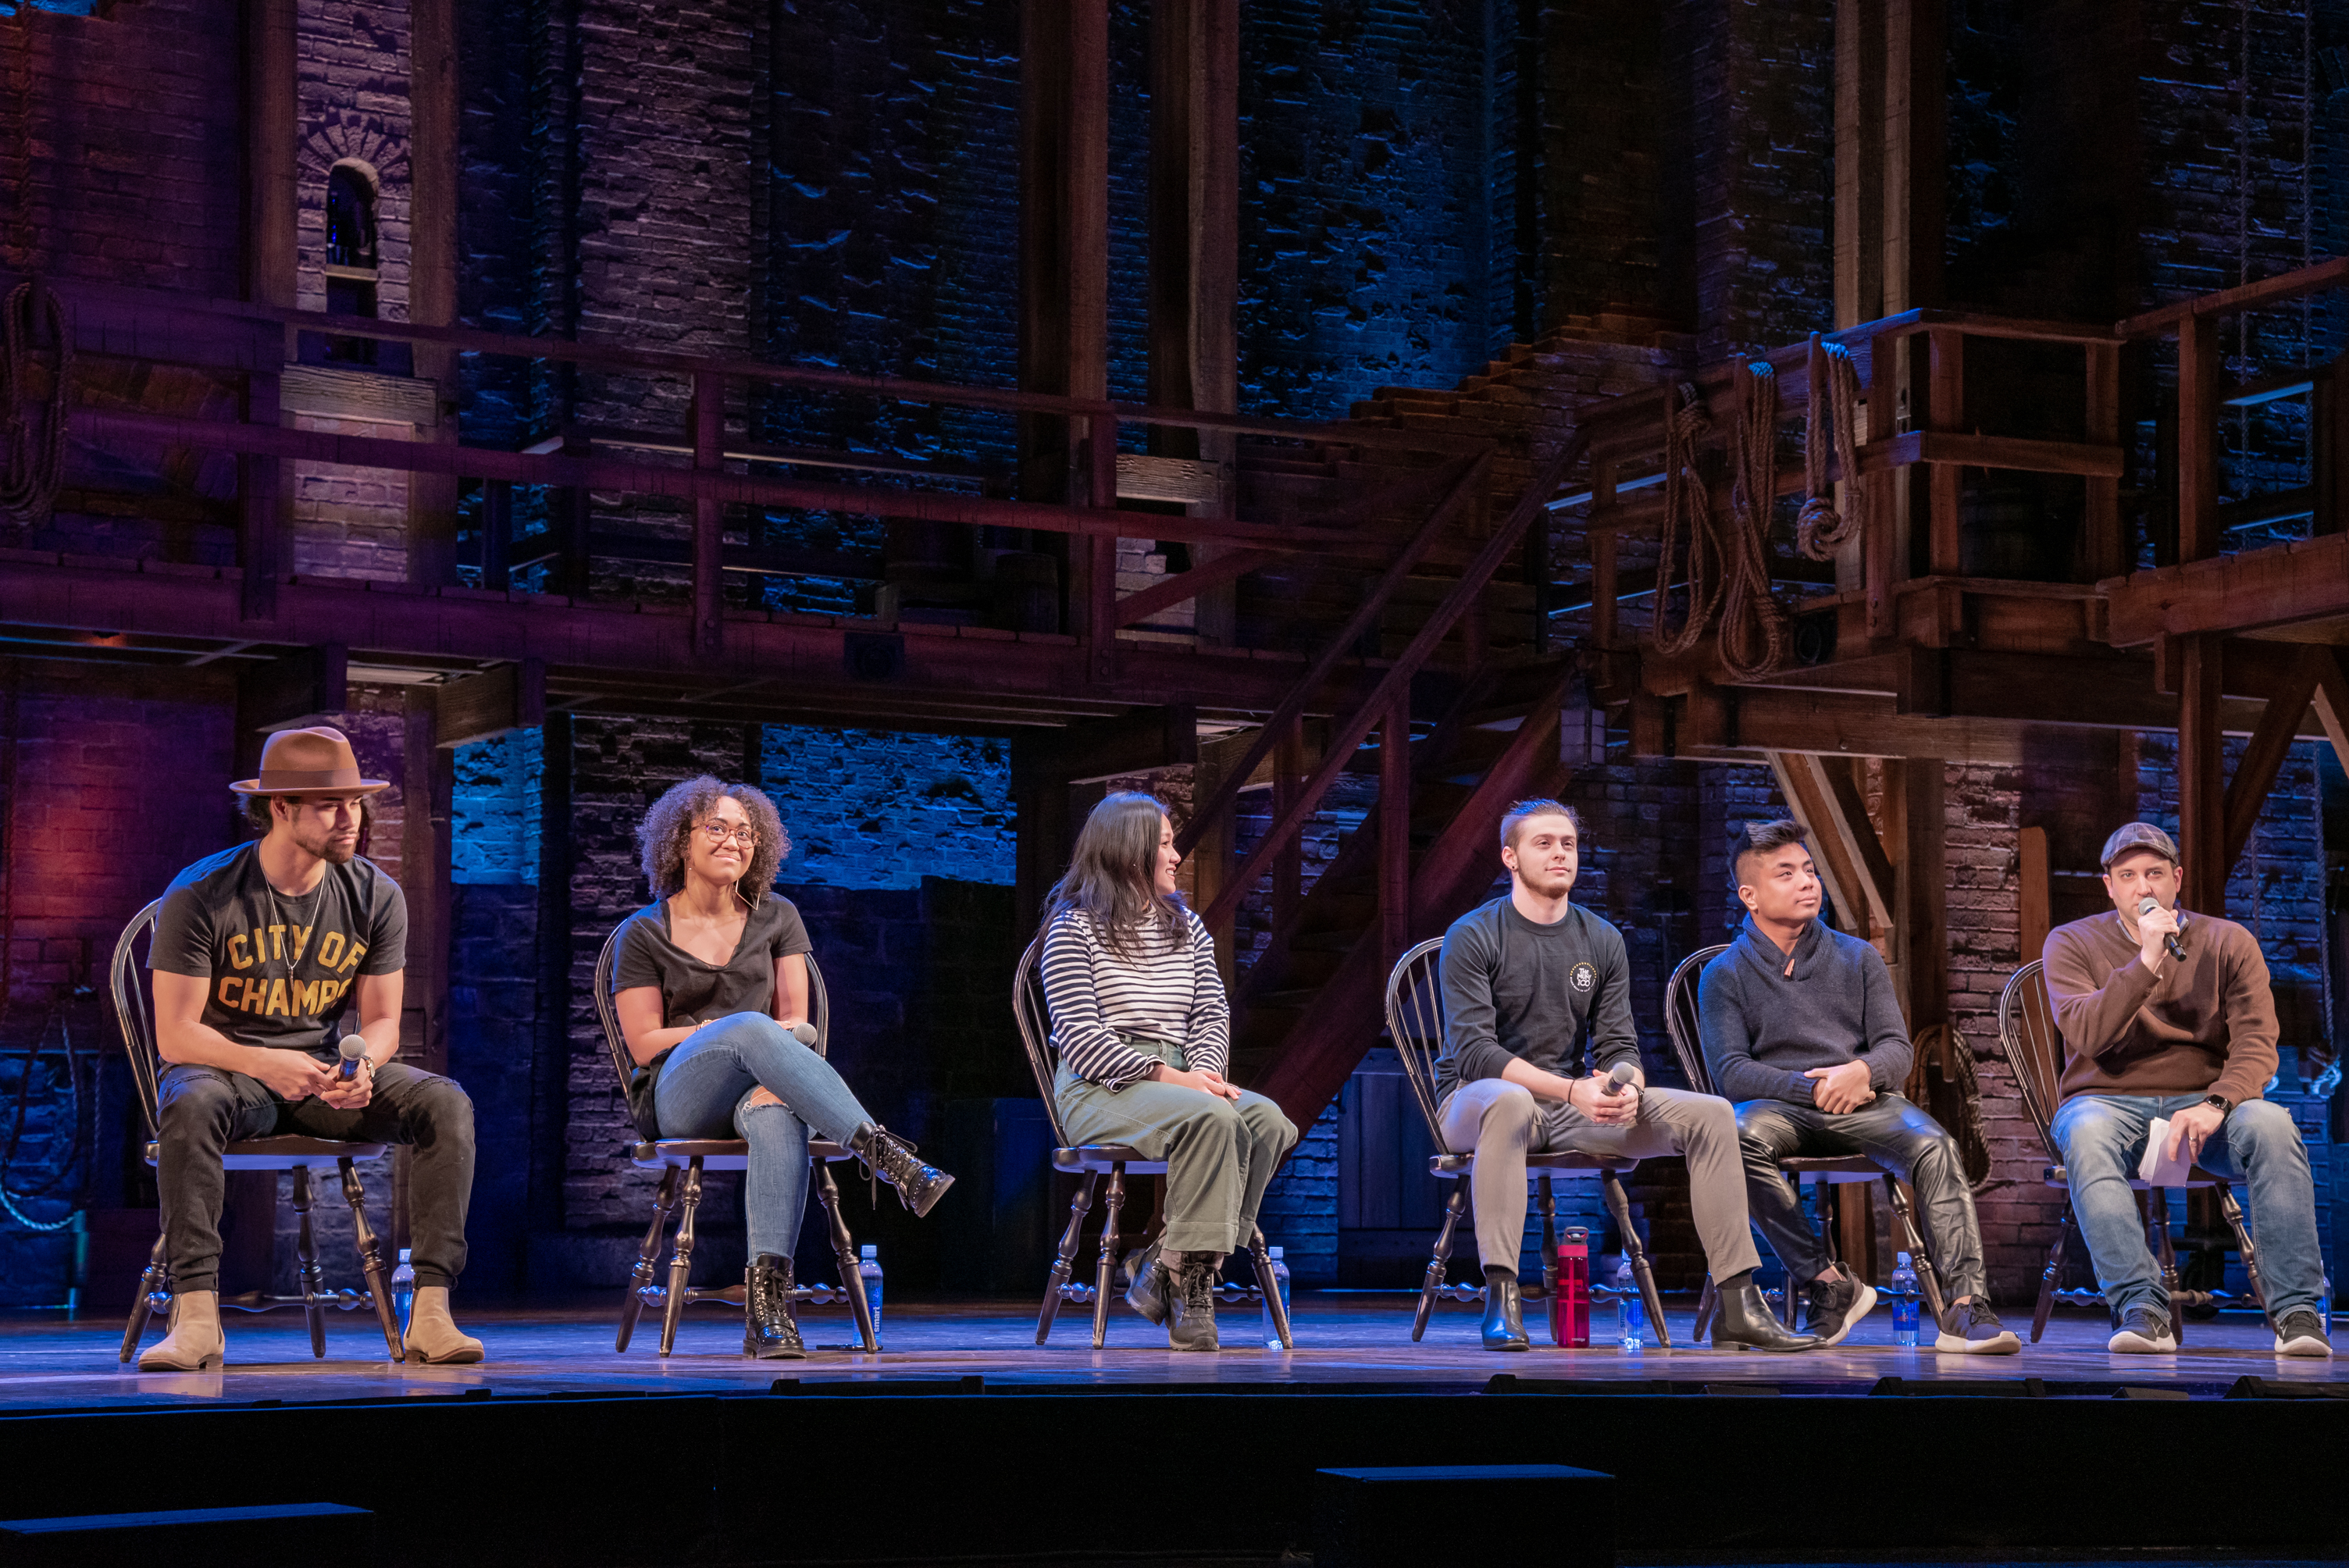 Actors from a touring cast of Hamilton in Pittsburgh in January of 2019 answer questions from an EduHam matinee audience.